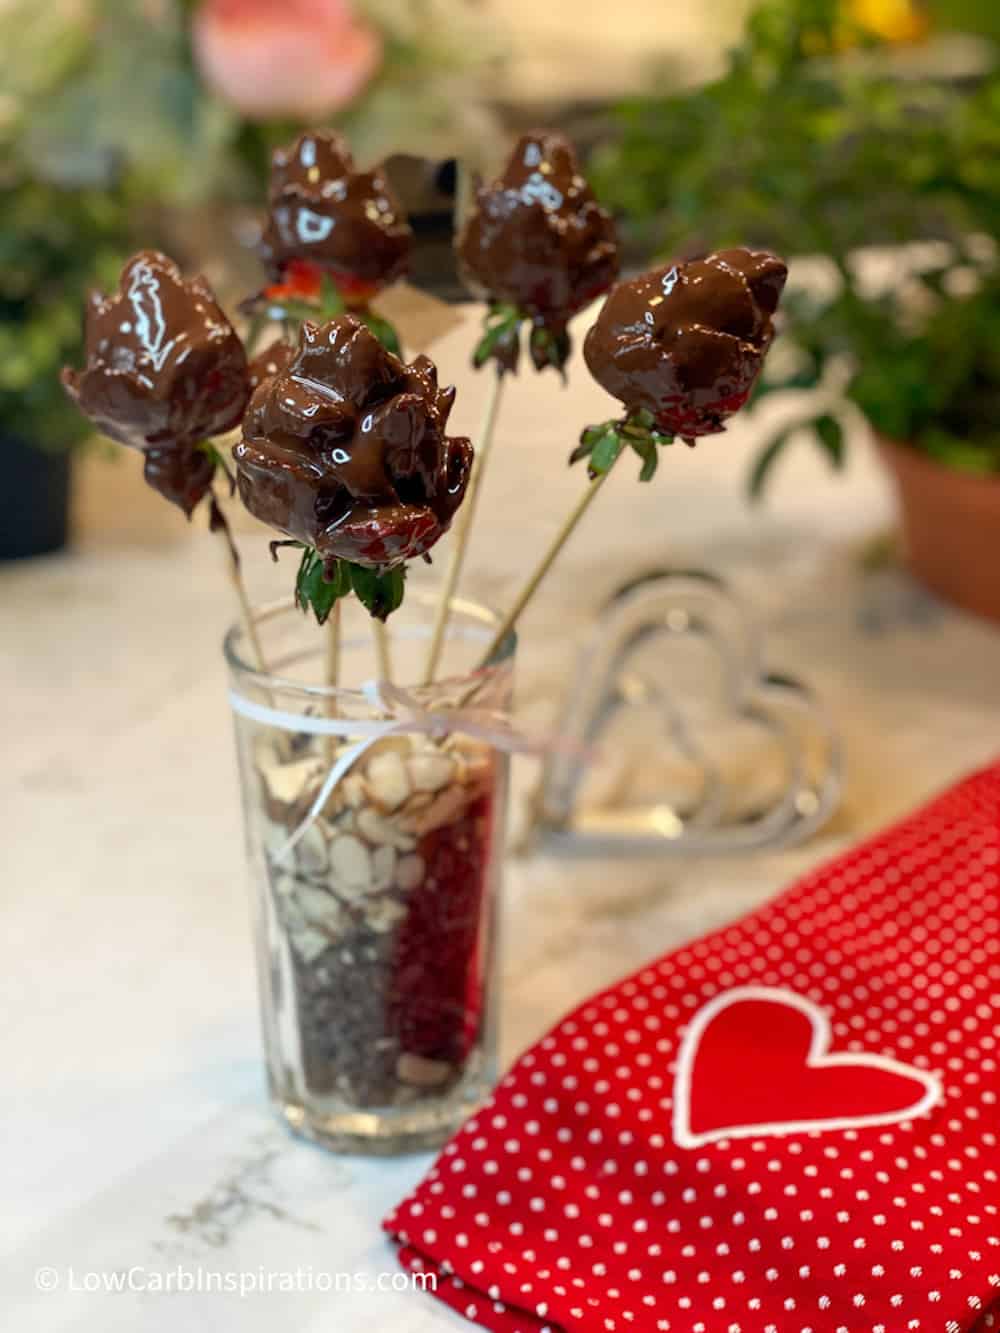 Sugar Free Chocolate Covered Strawberry Roses